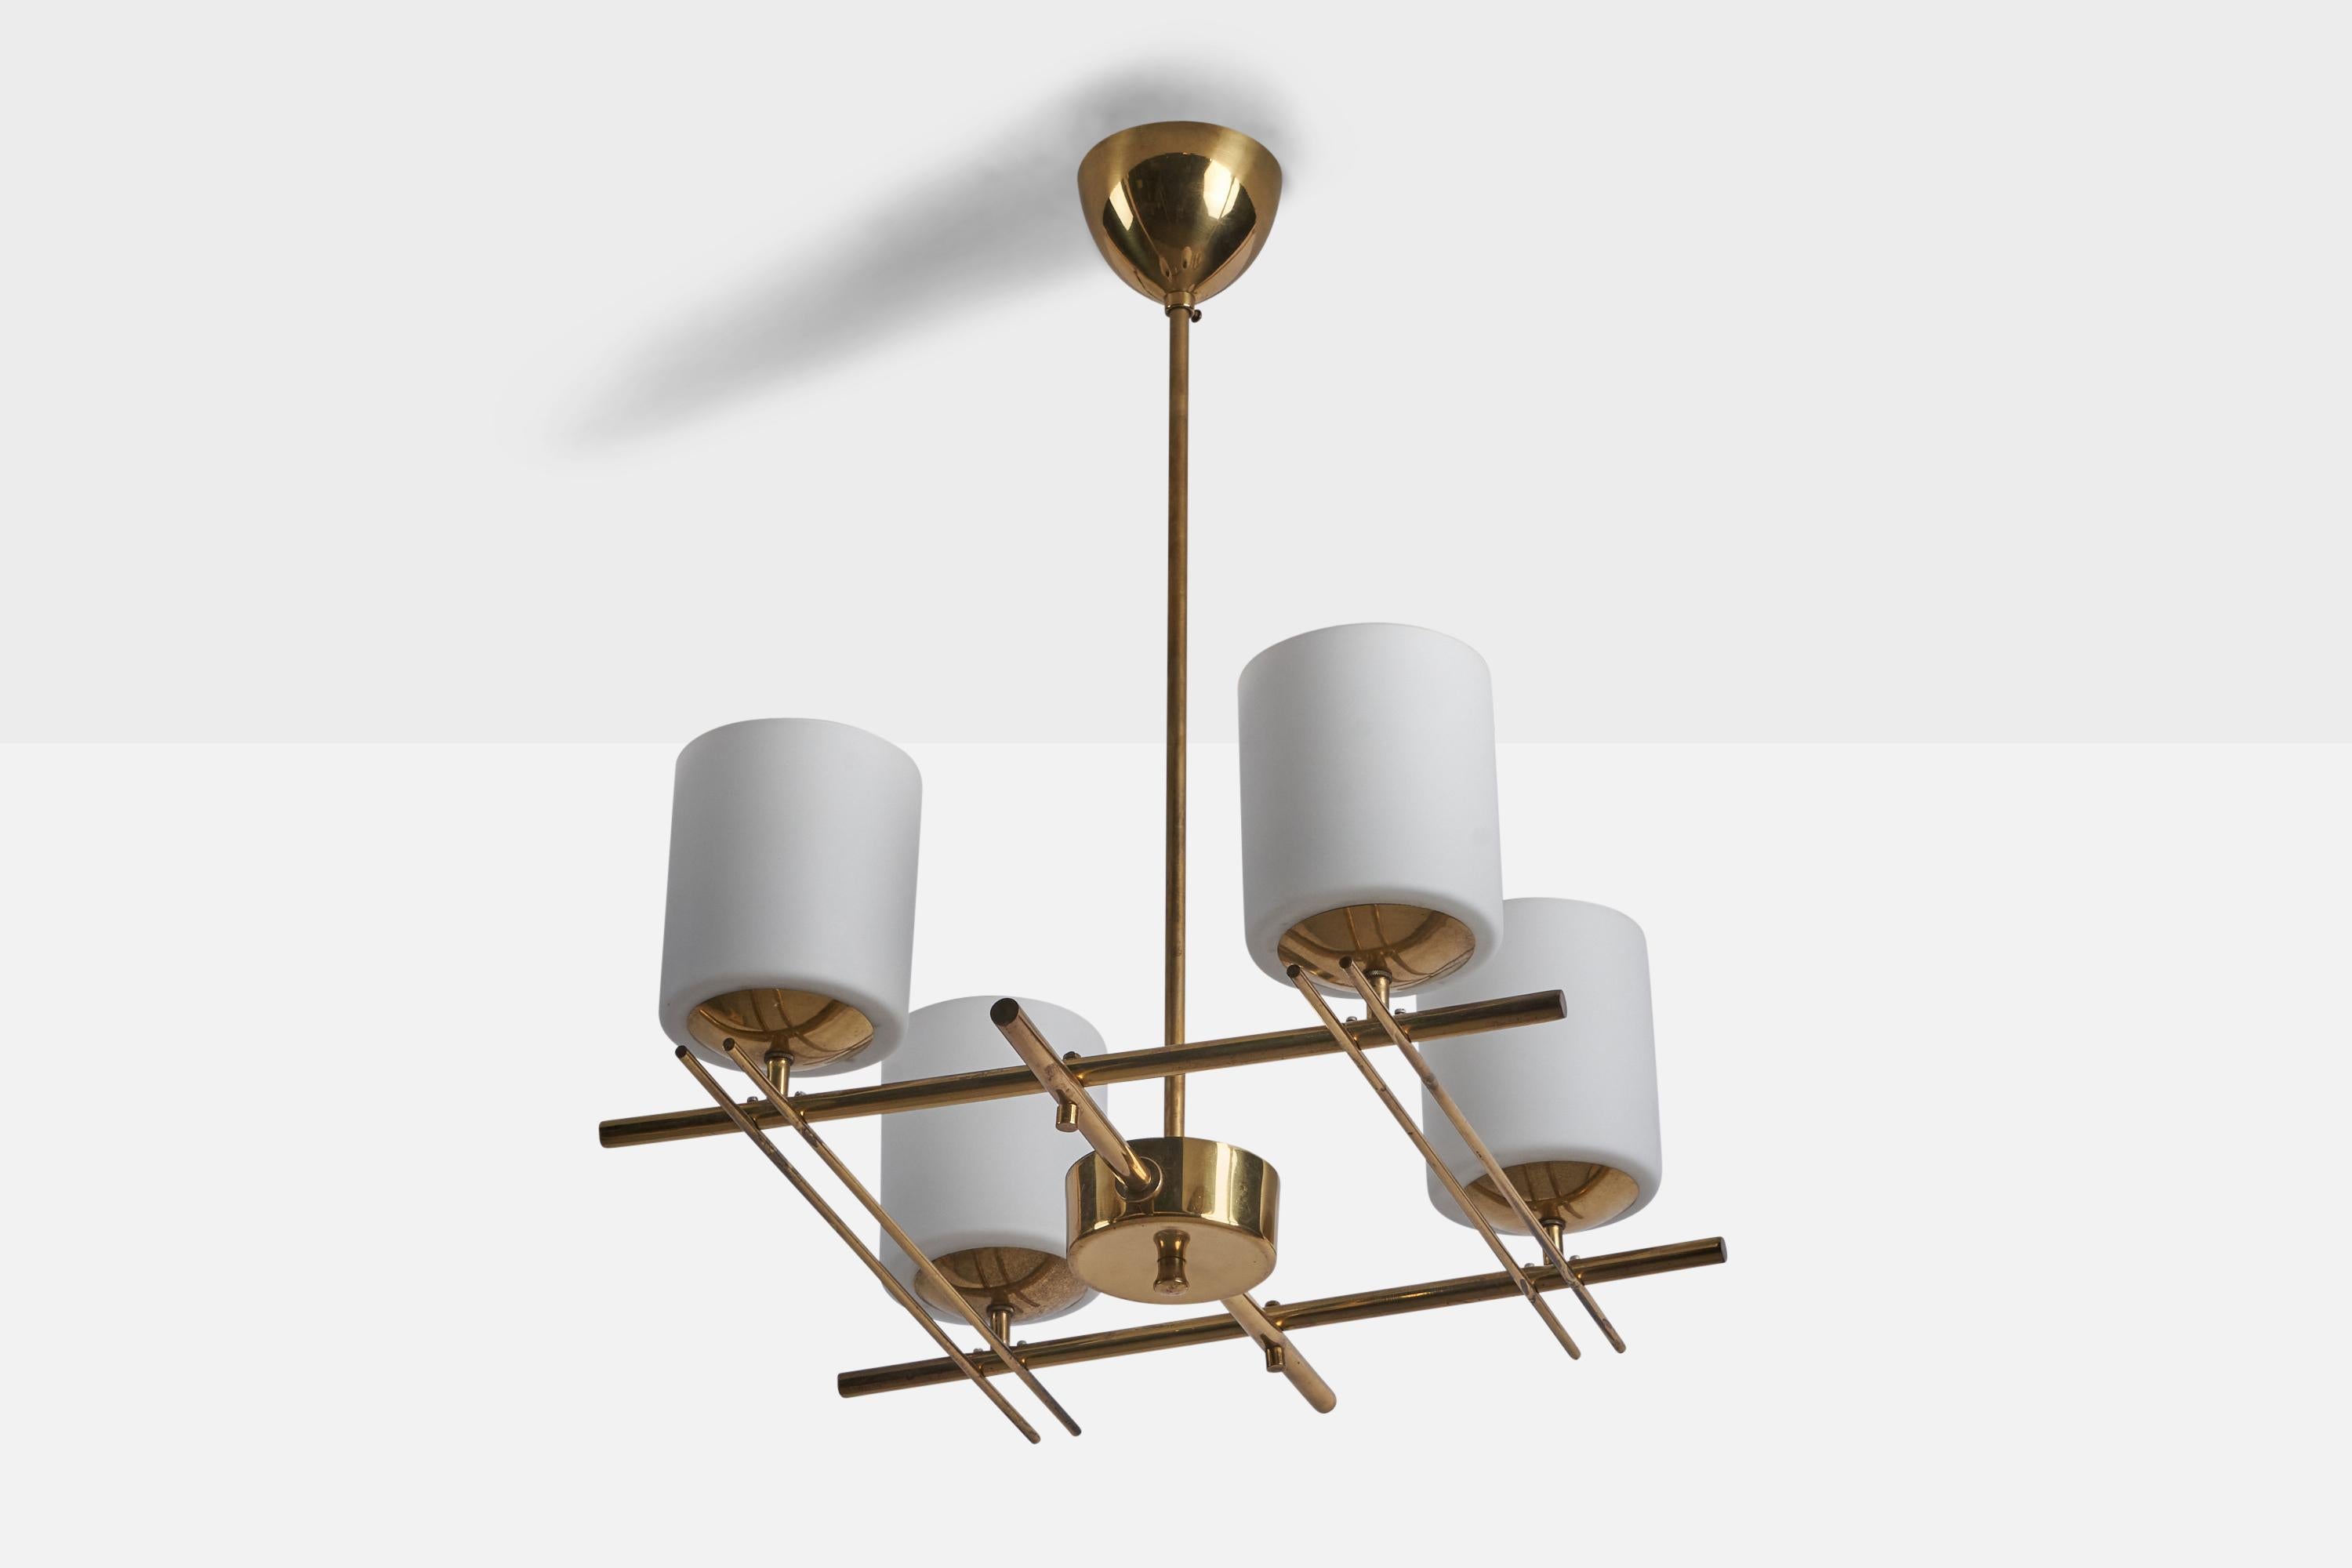 A four-armed brass and opaline glass chandelier designed and produced by Itsu OY, Finland, c. 1950s.

Overall Dimensions (inches): 23” H x 17” W x 17” D
Bulb Specifications: E-26 Bulb
Number of Sockets: 4